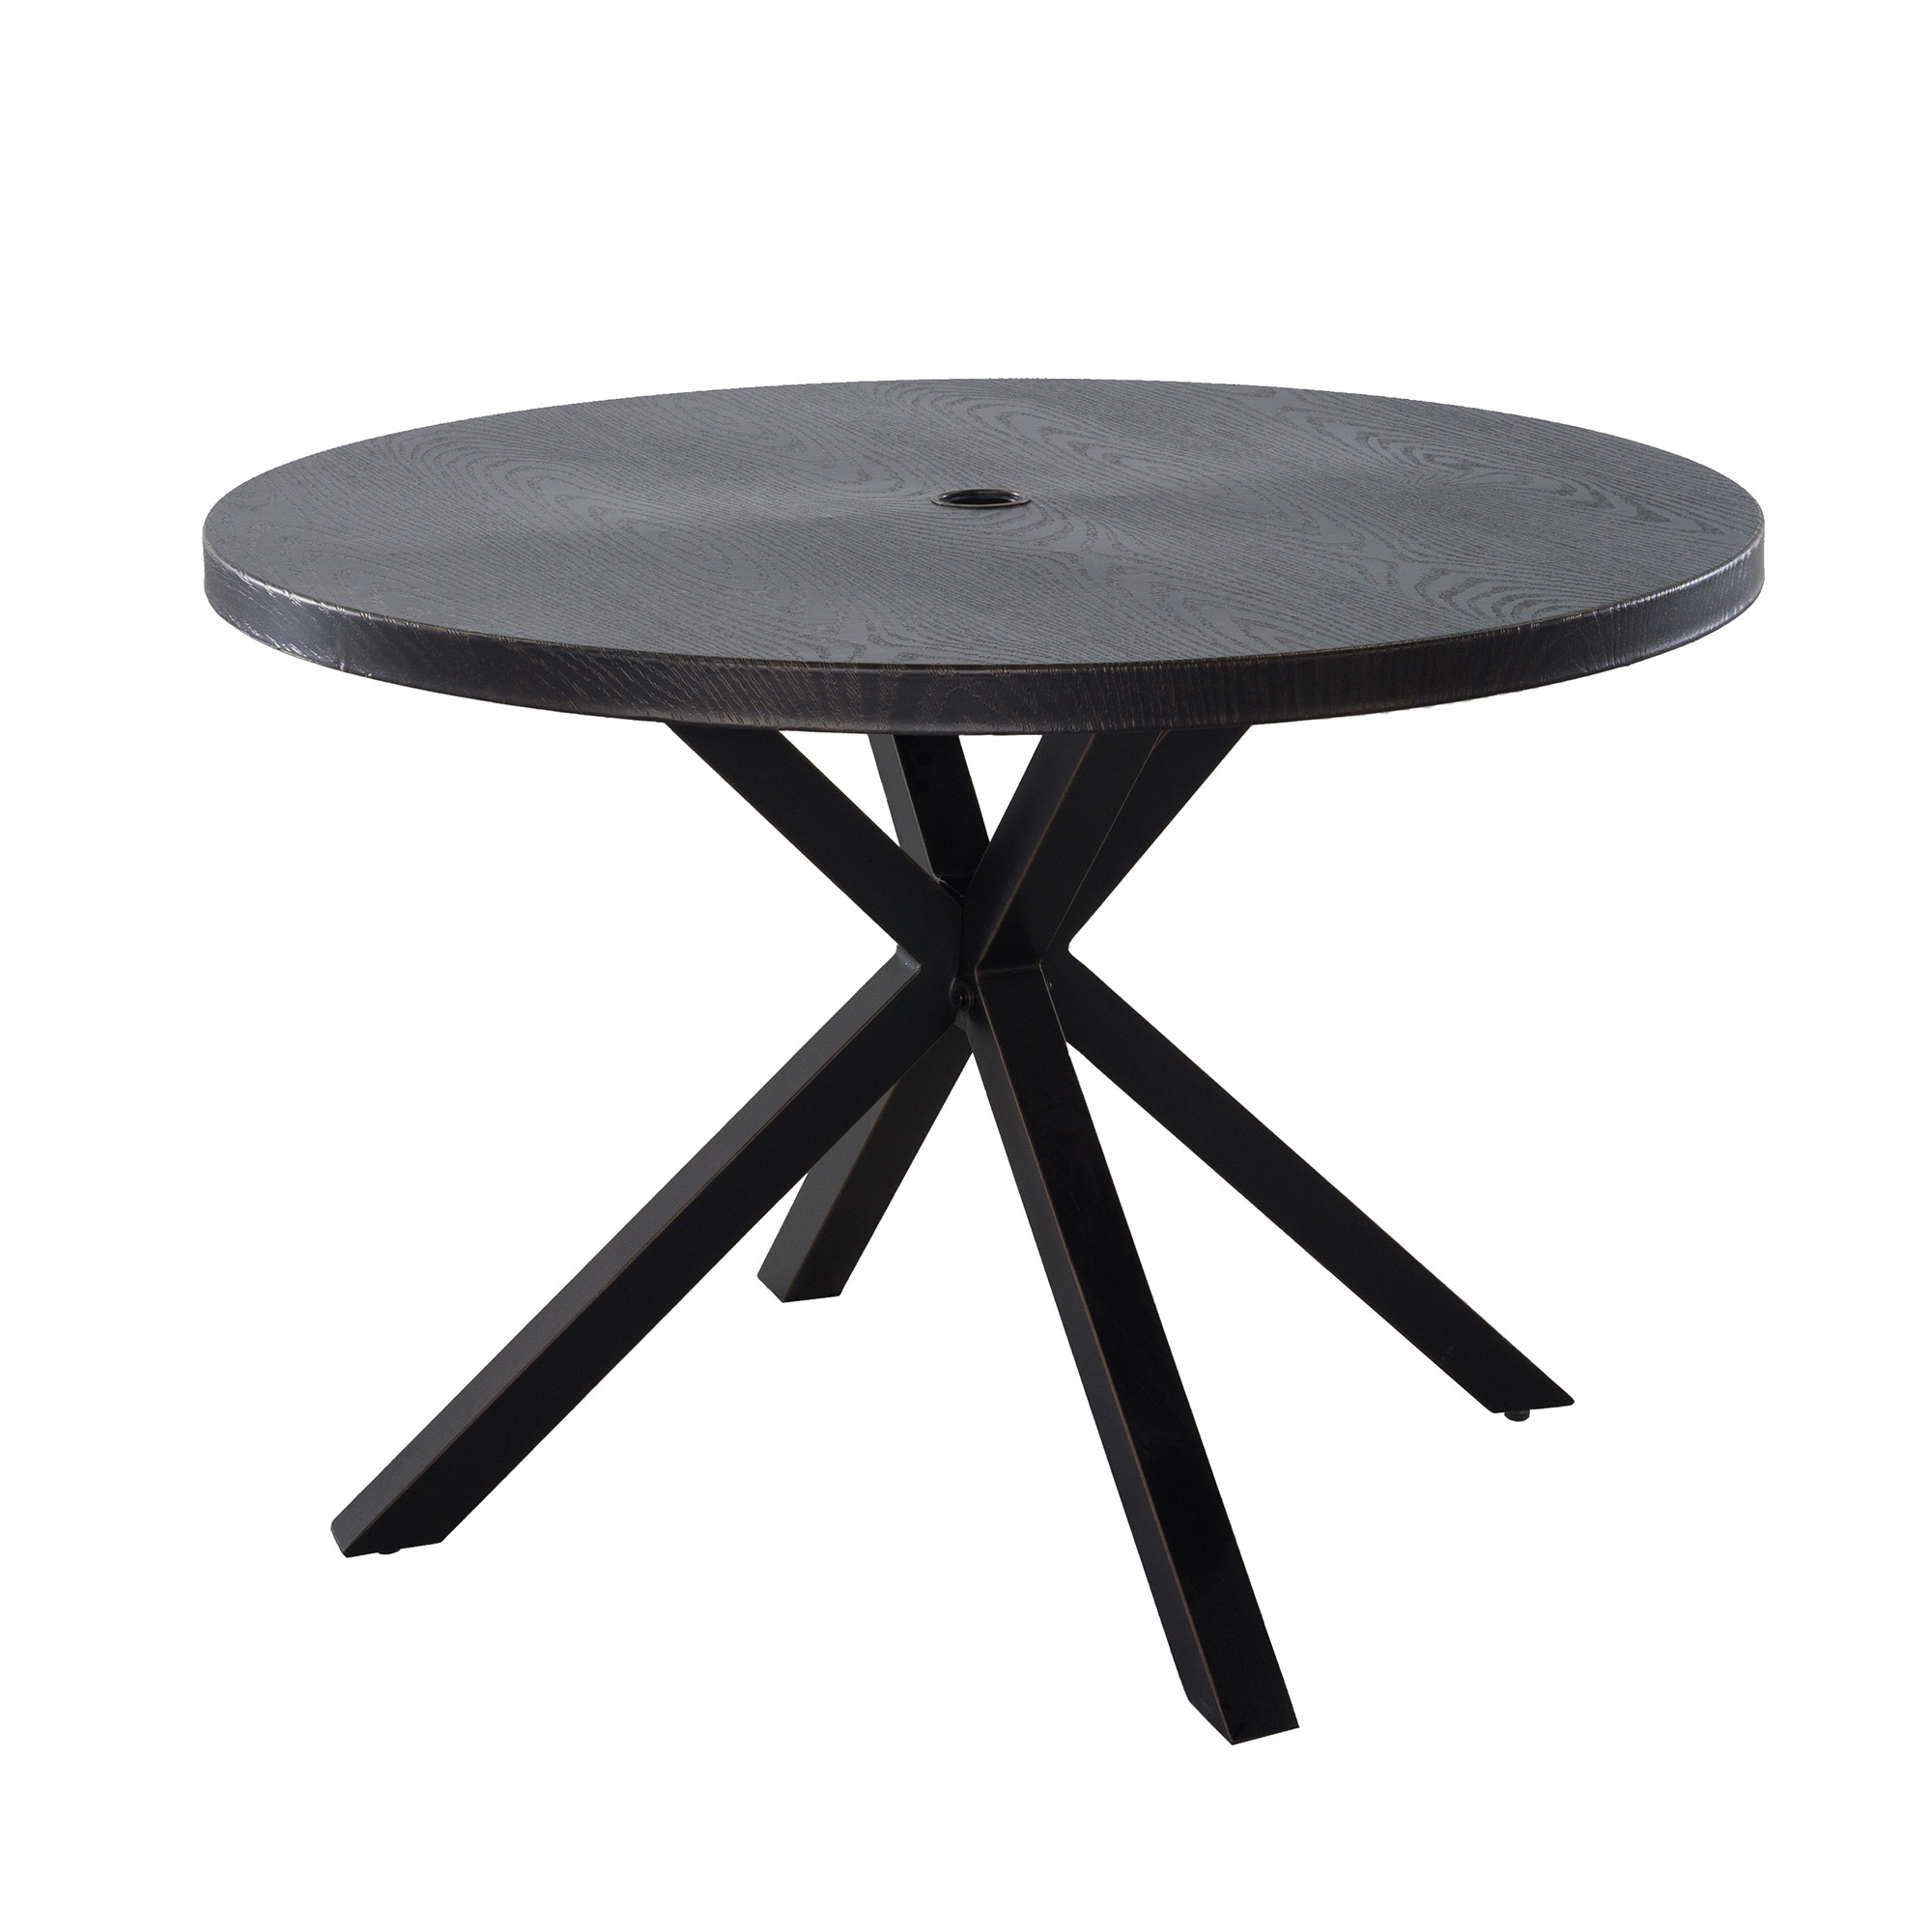 42 inch W Round Aluminum Outdoor Dining Table